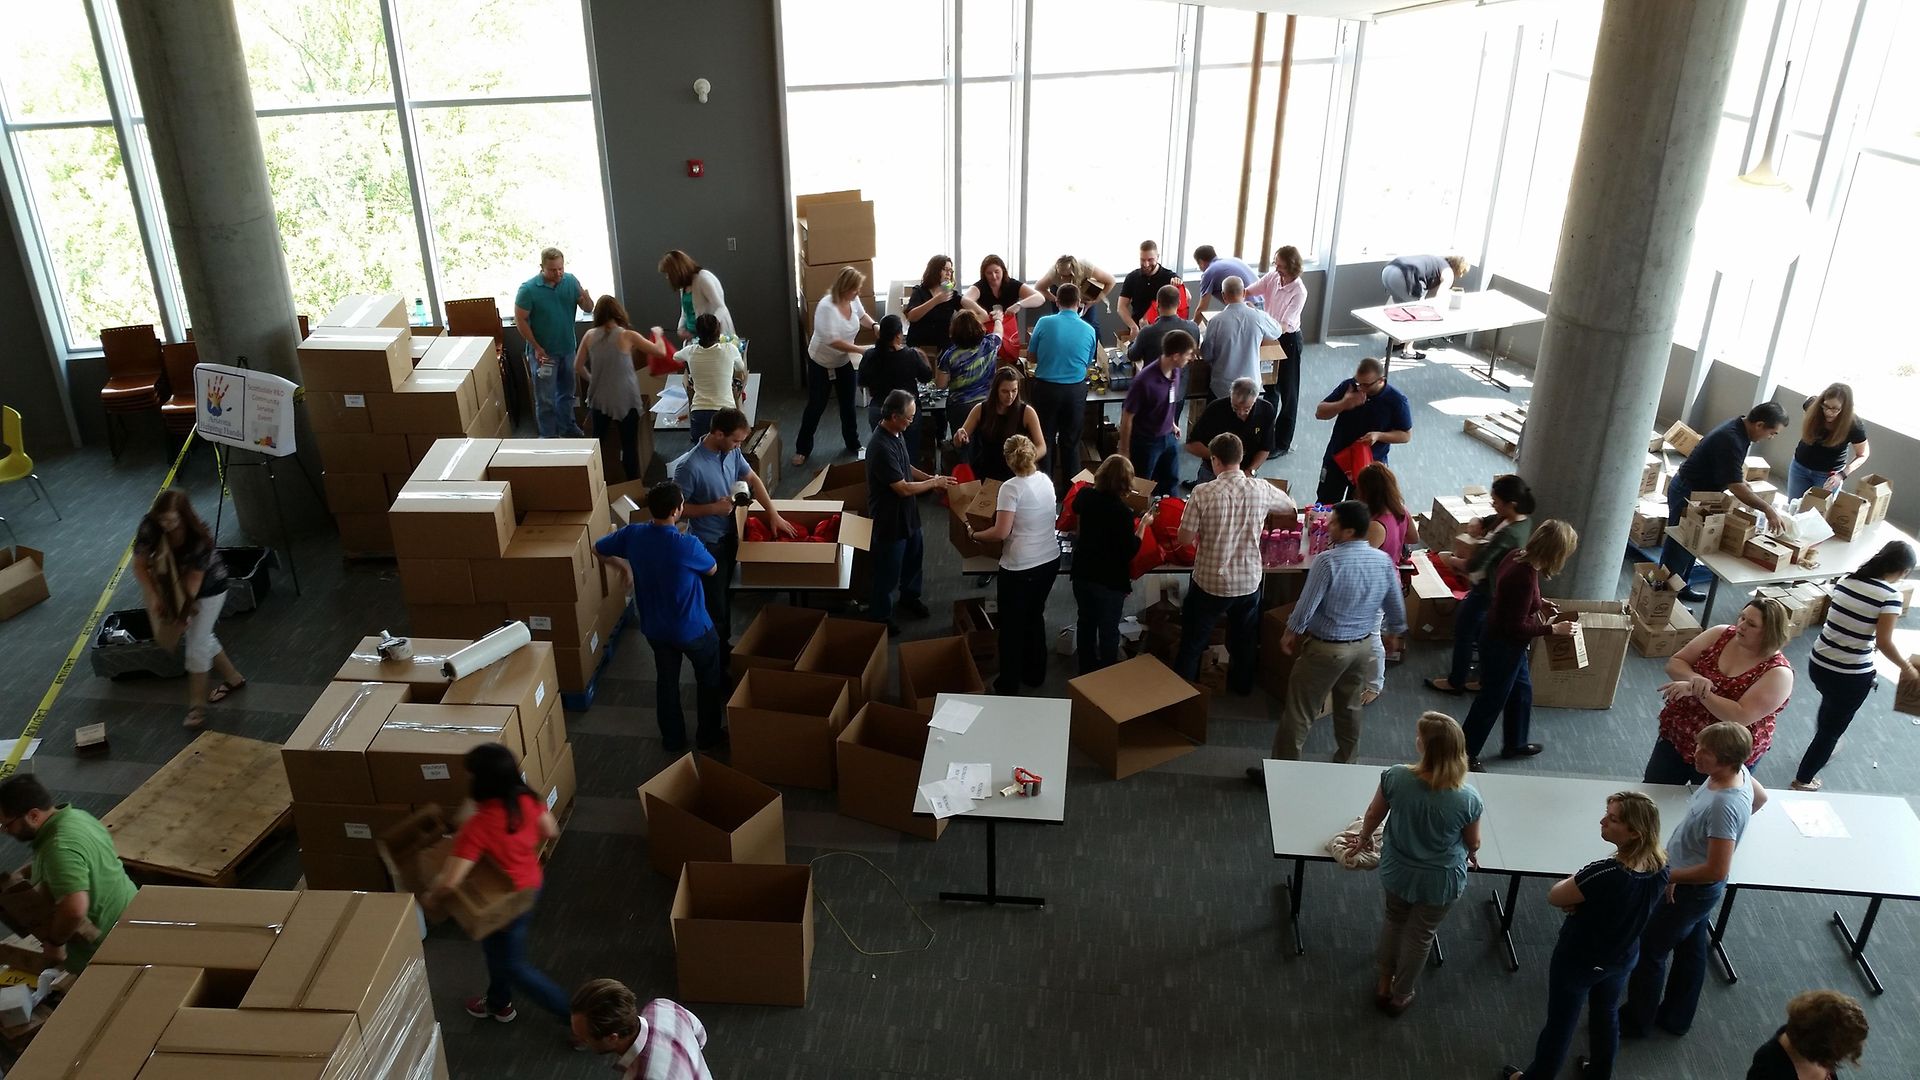 Employees packed one thousand “Dream Kits”